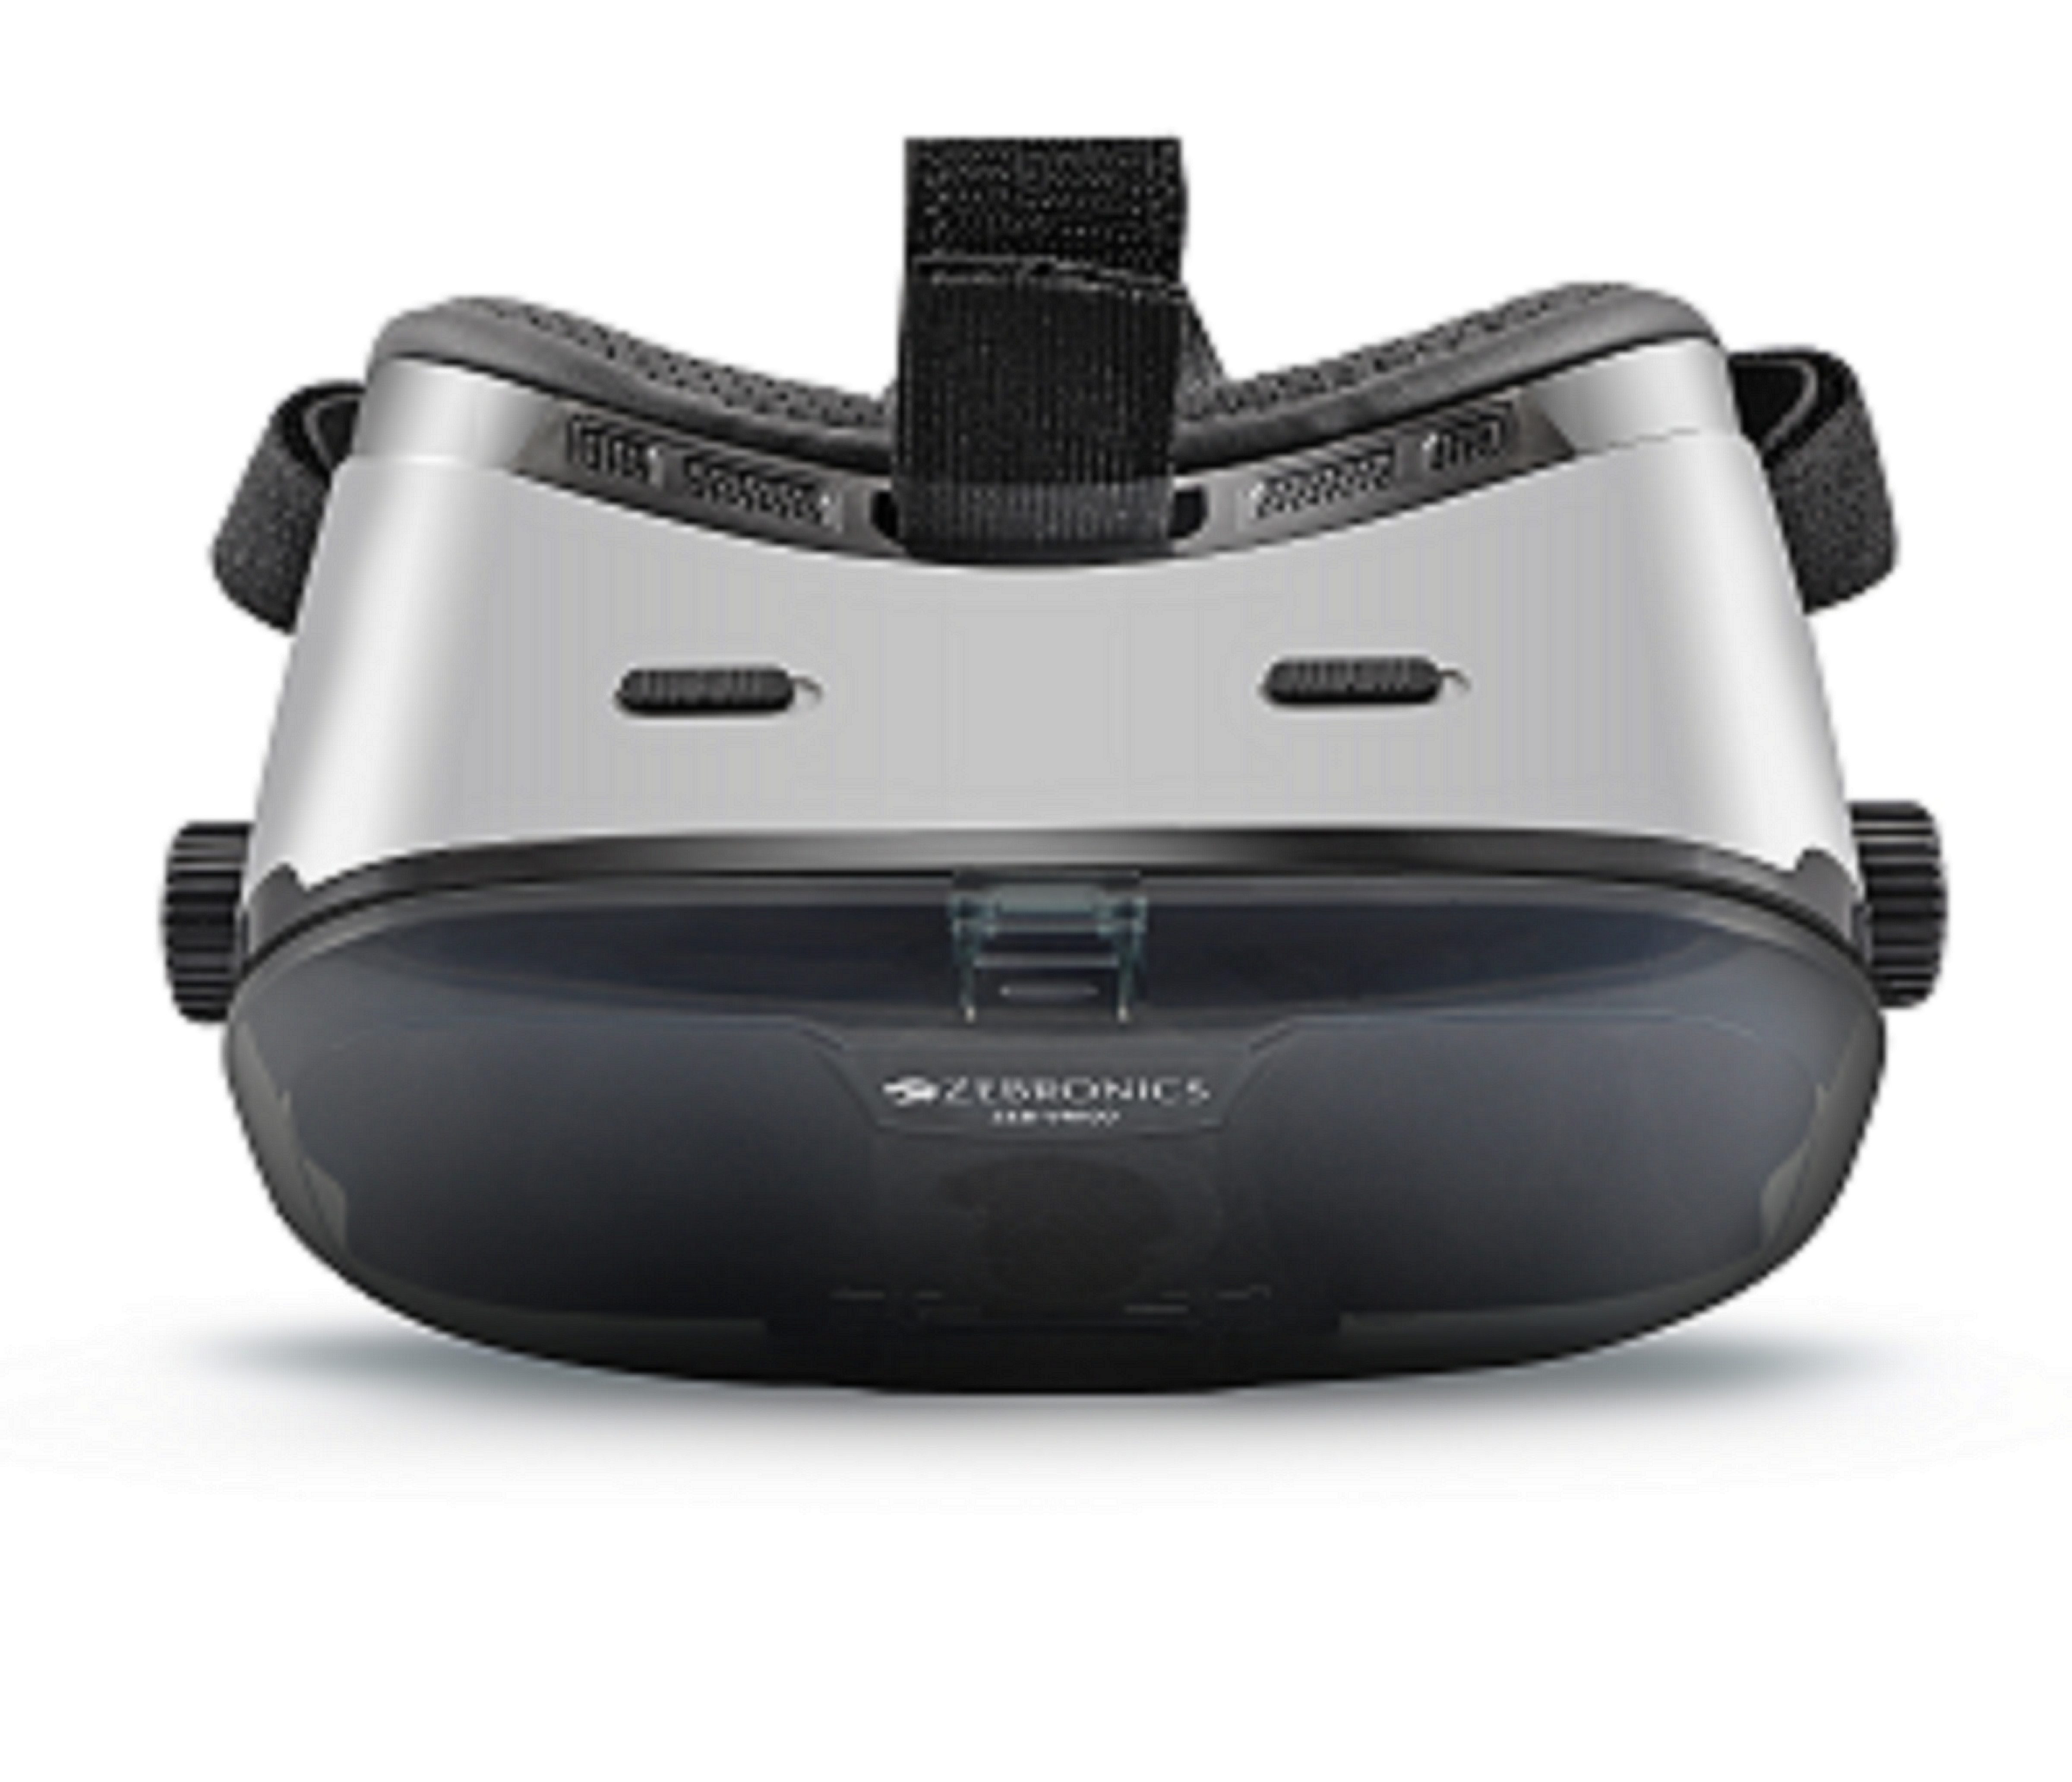 Zebronics extends its VR headset range with ‘ZEB-VR100’ priced at just Rs. 1499/- #Zebronics #ZEBVR100 https://www.hgunified.com/home/zebronics-extends-vr-headset-range-zeb-vr100-priced-just-rs-1499.html